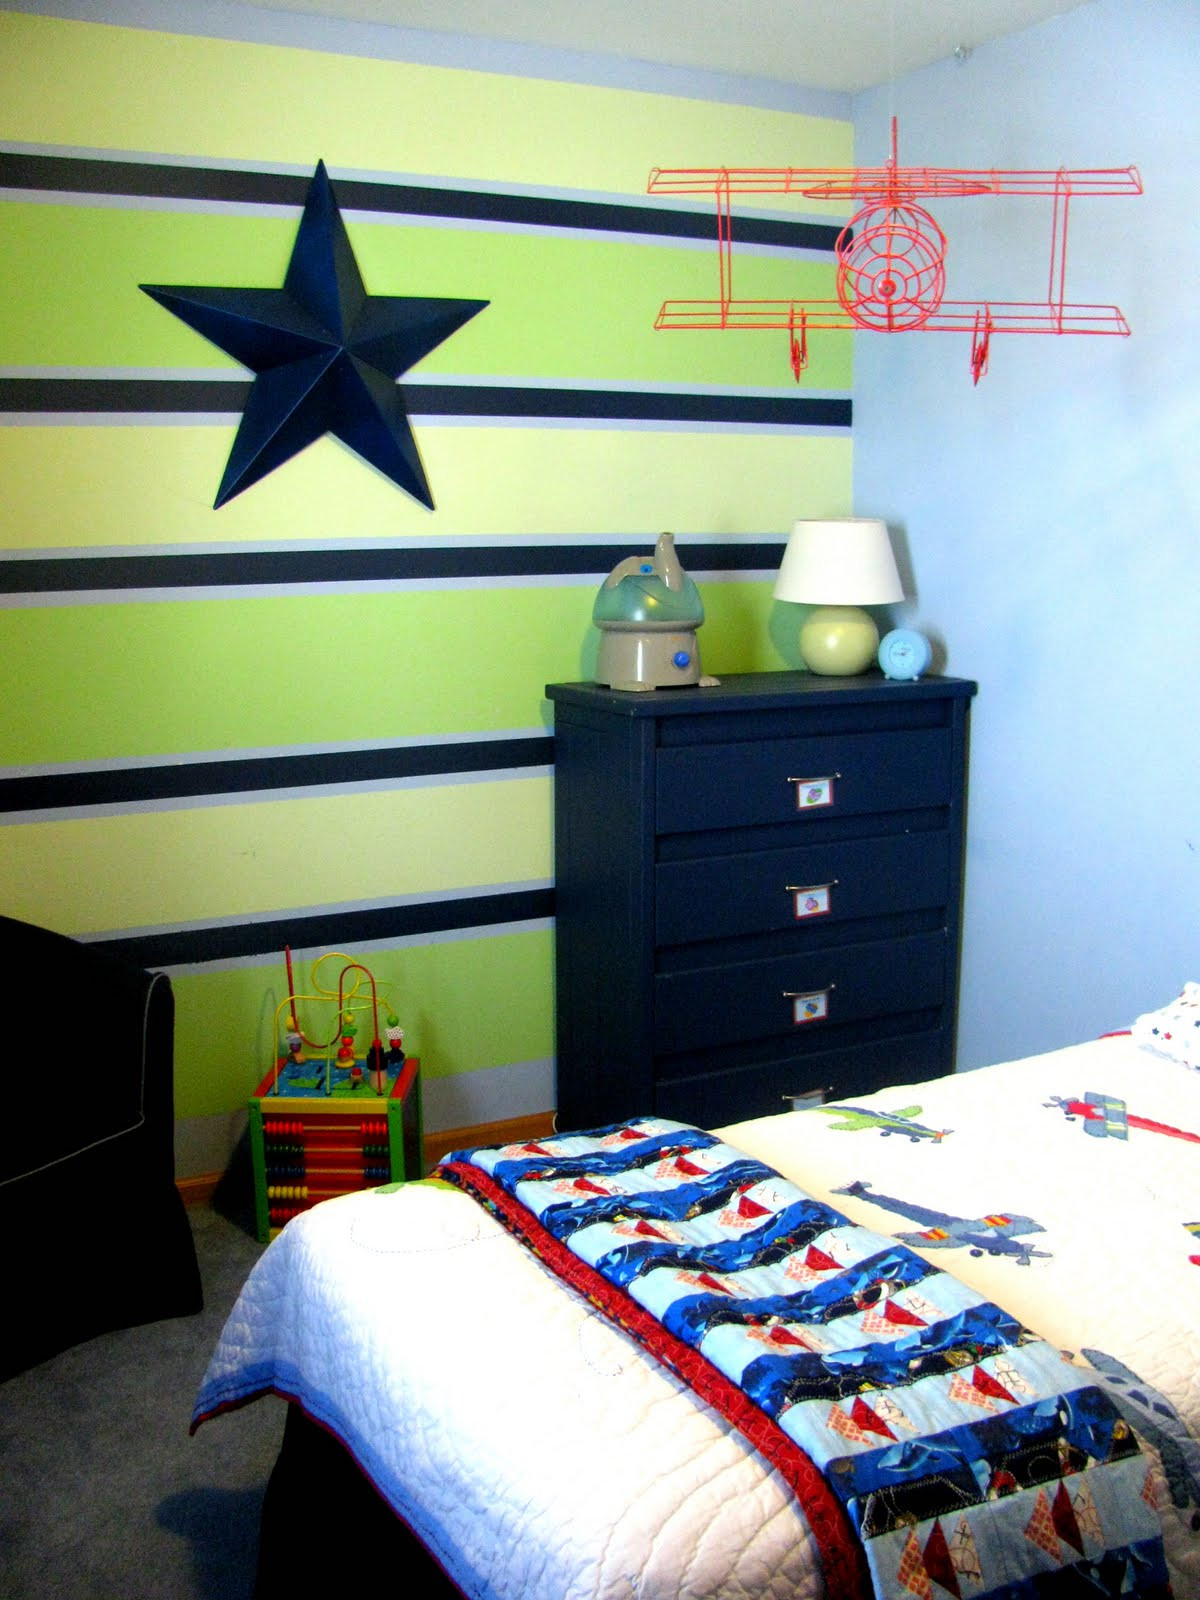 Painting Ideas For Boy Bedroom
 IHeart Organizing August Featured Space Bedroom